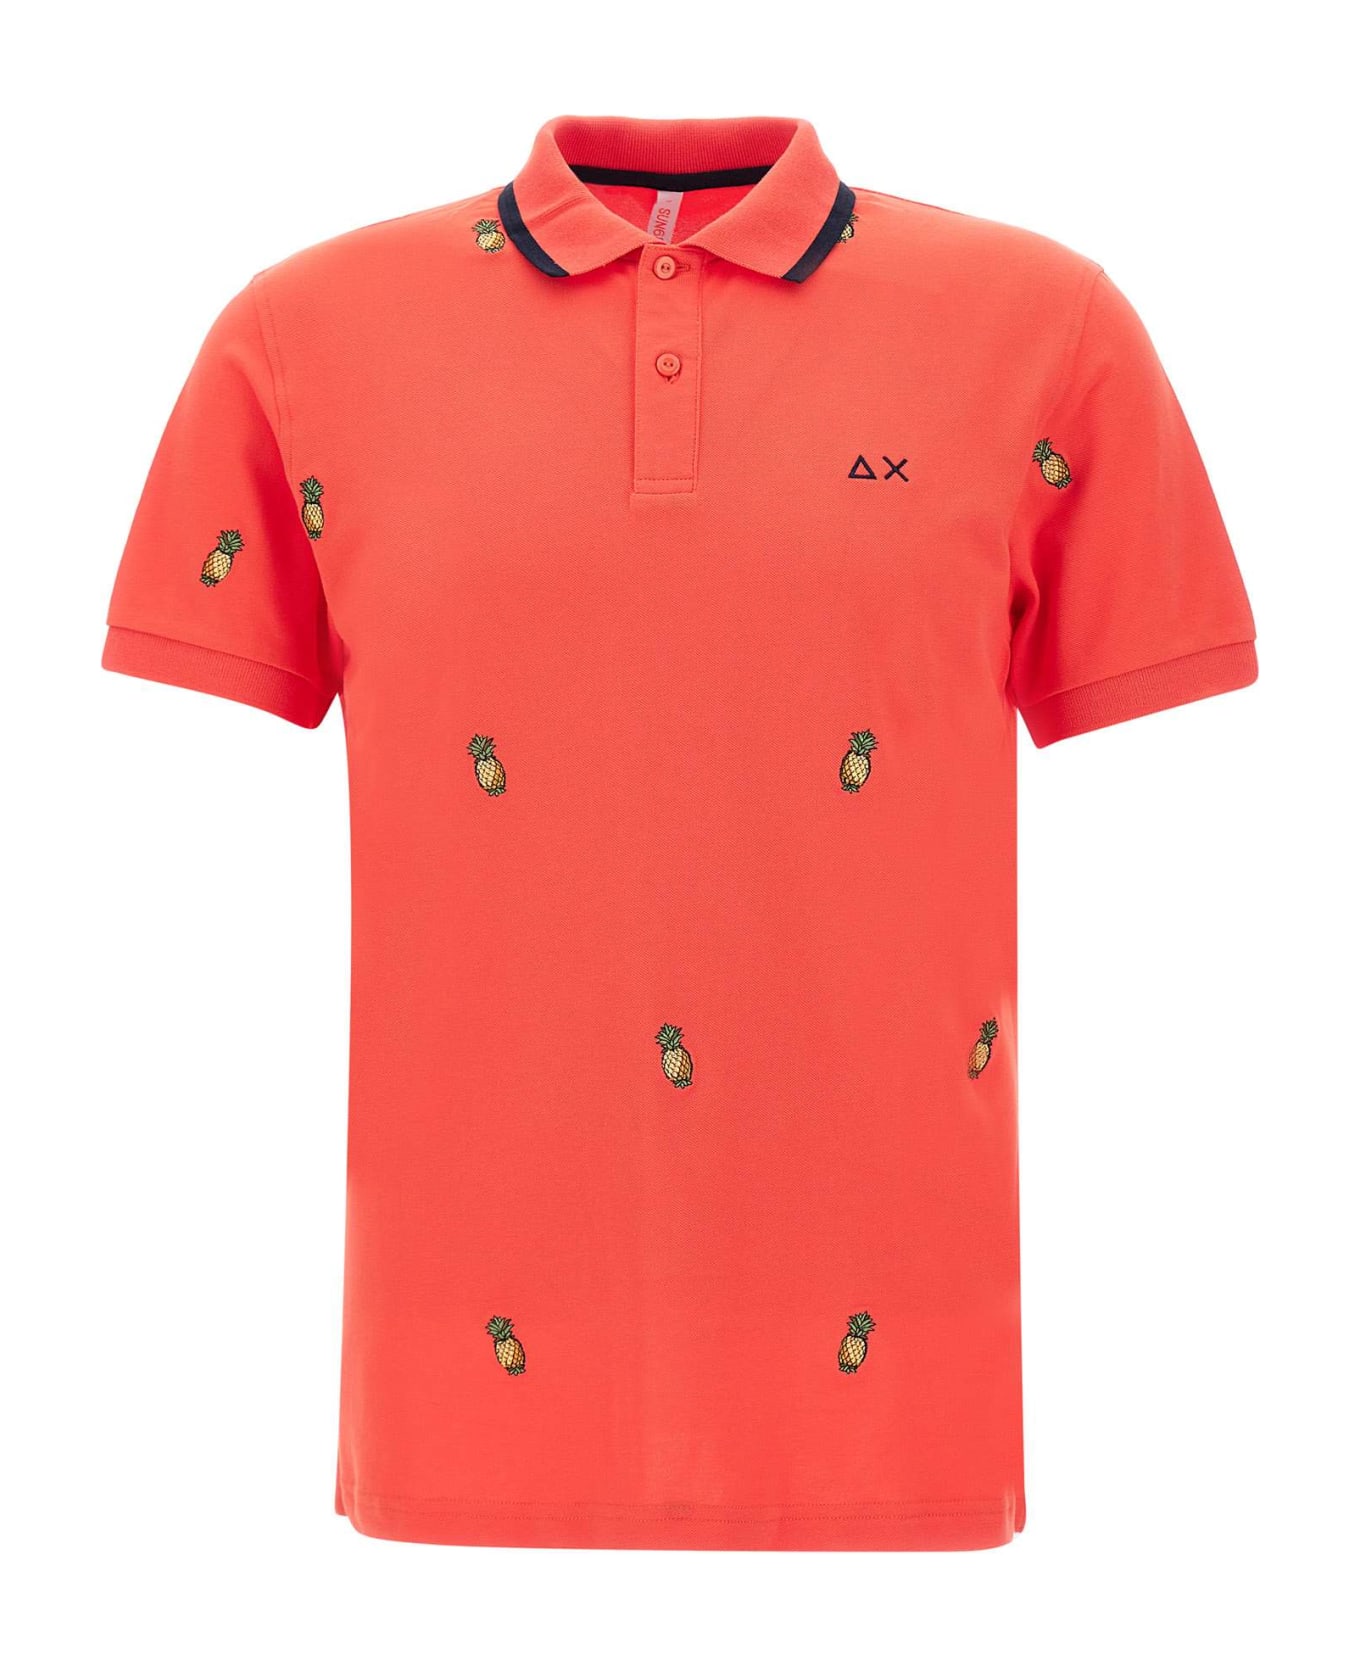 Sun 68 "full Embrodery" Cotton Polo Shirt - RED ポロシャツ